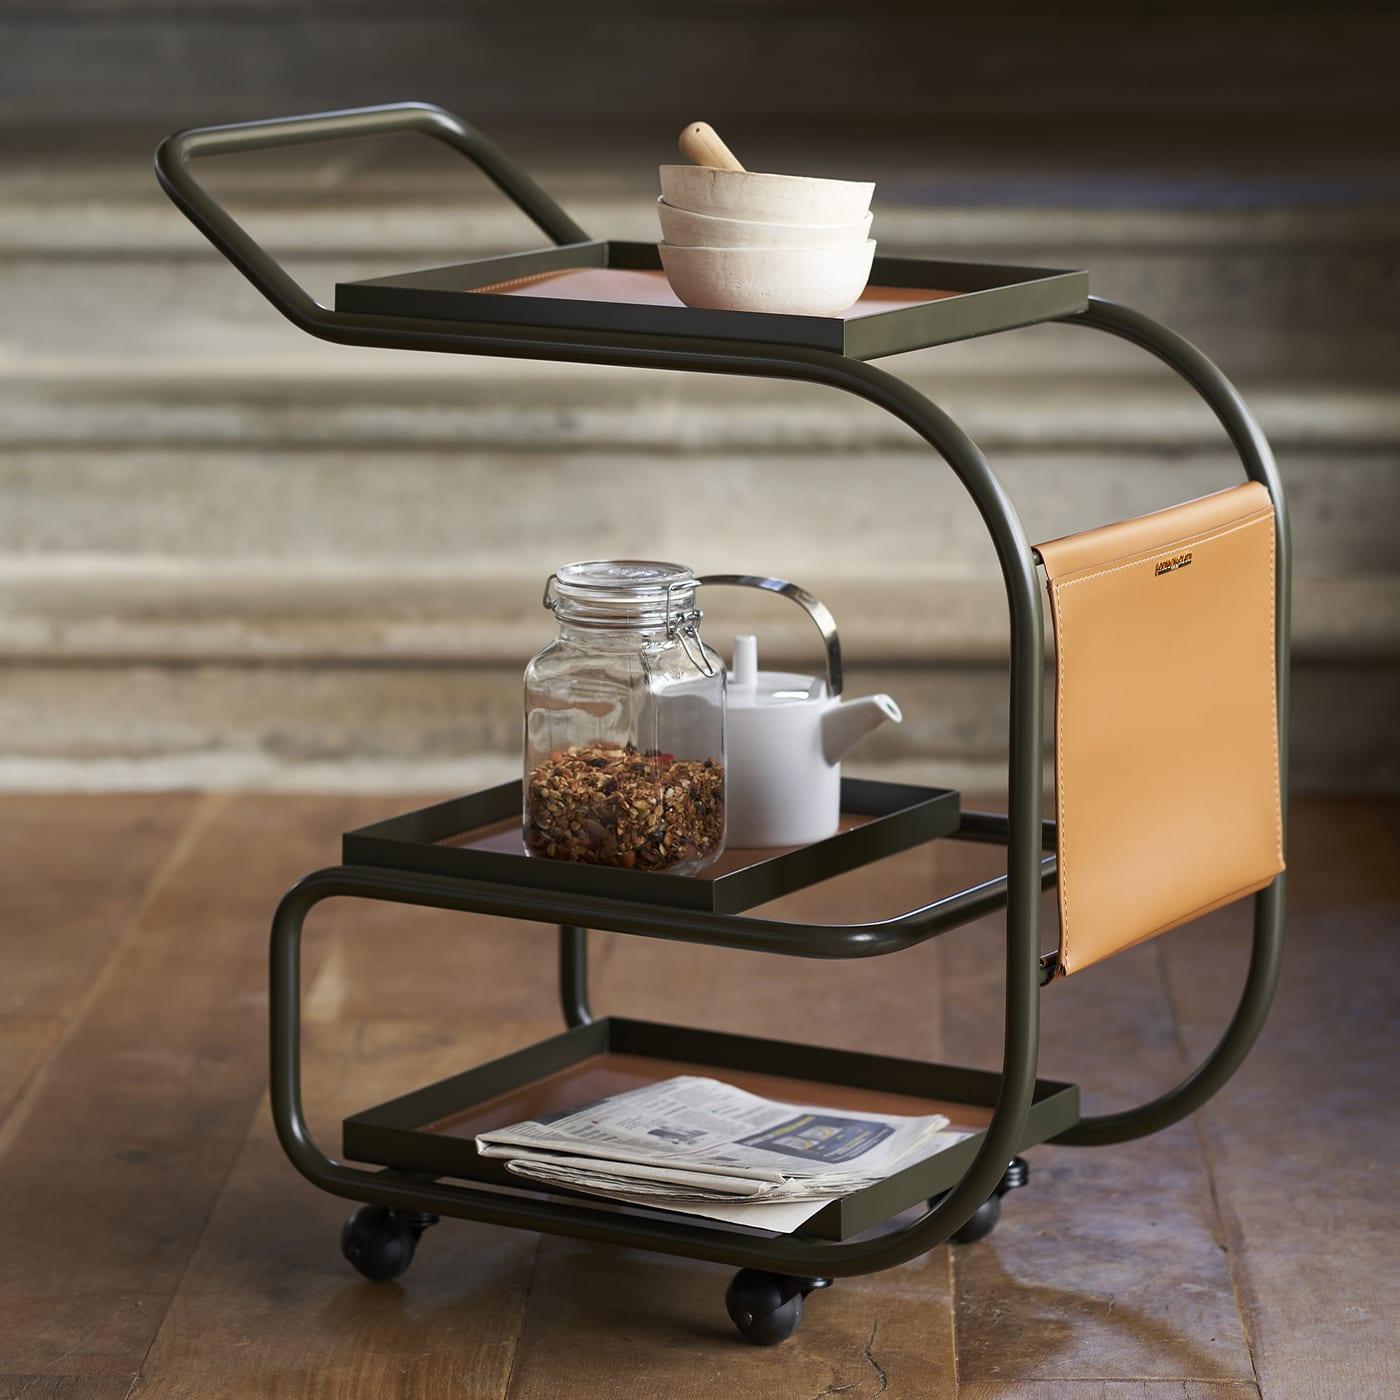 This superb bar cart is perfect for serving tea or sharing a drink with guests after a long day or on a relaxing weekend. Its tubular steel frame finished in a dark-green lacquer boasts a sinuous shape where three rectangular trays are fitted - one